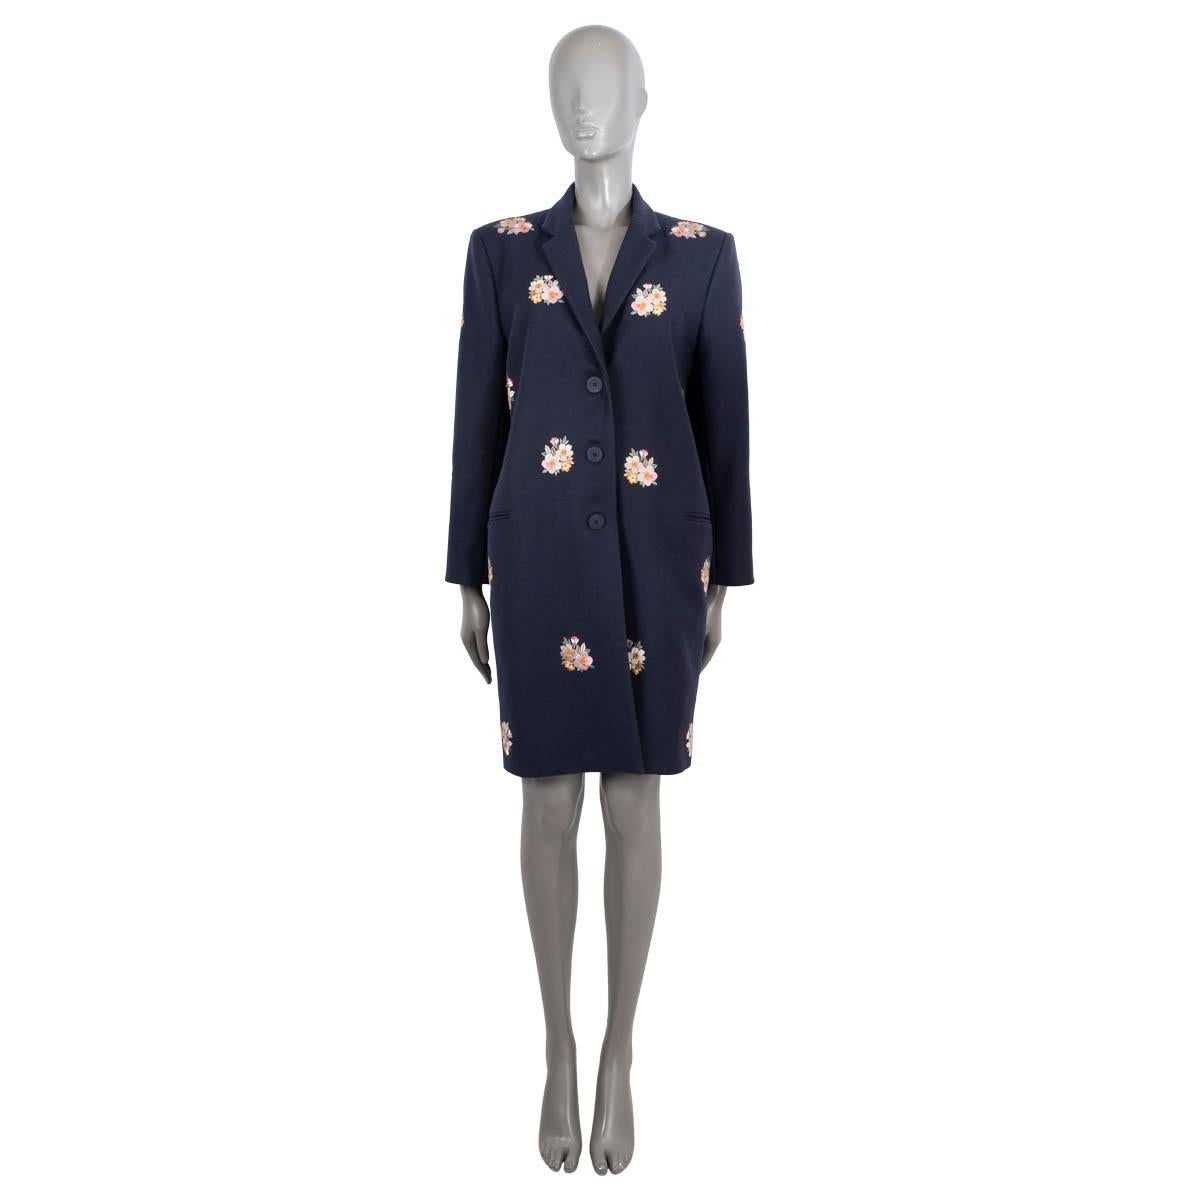 100% authentic Vilshenko coat in midnight blue virgin wool (100%). Features multicolor floral embroidery through-out, notched lapels and two welt pockets on the front. Opens with three buttons on the front. Lined in midnight blue viscose (59%) and